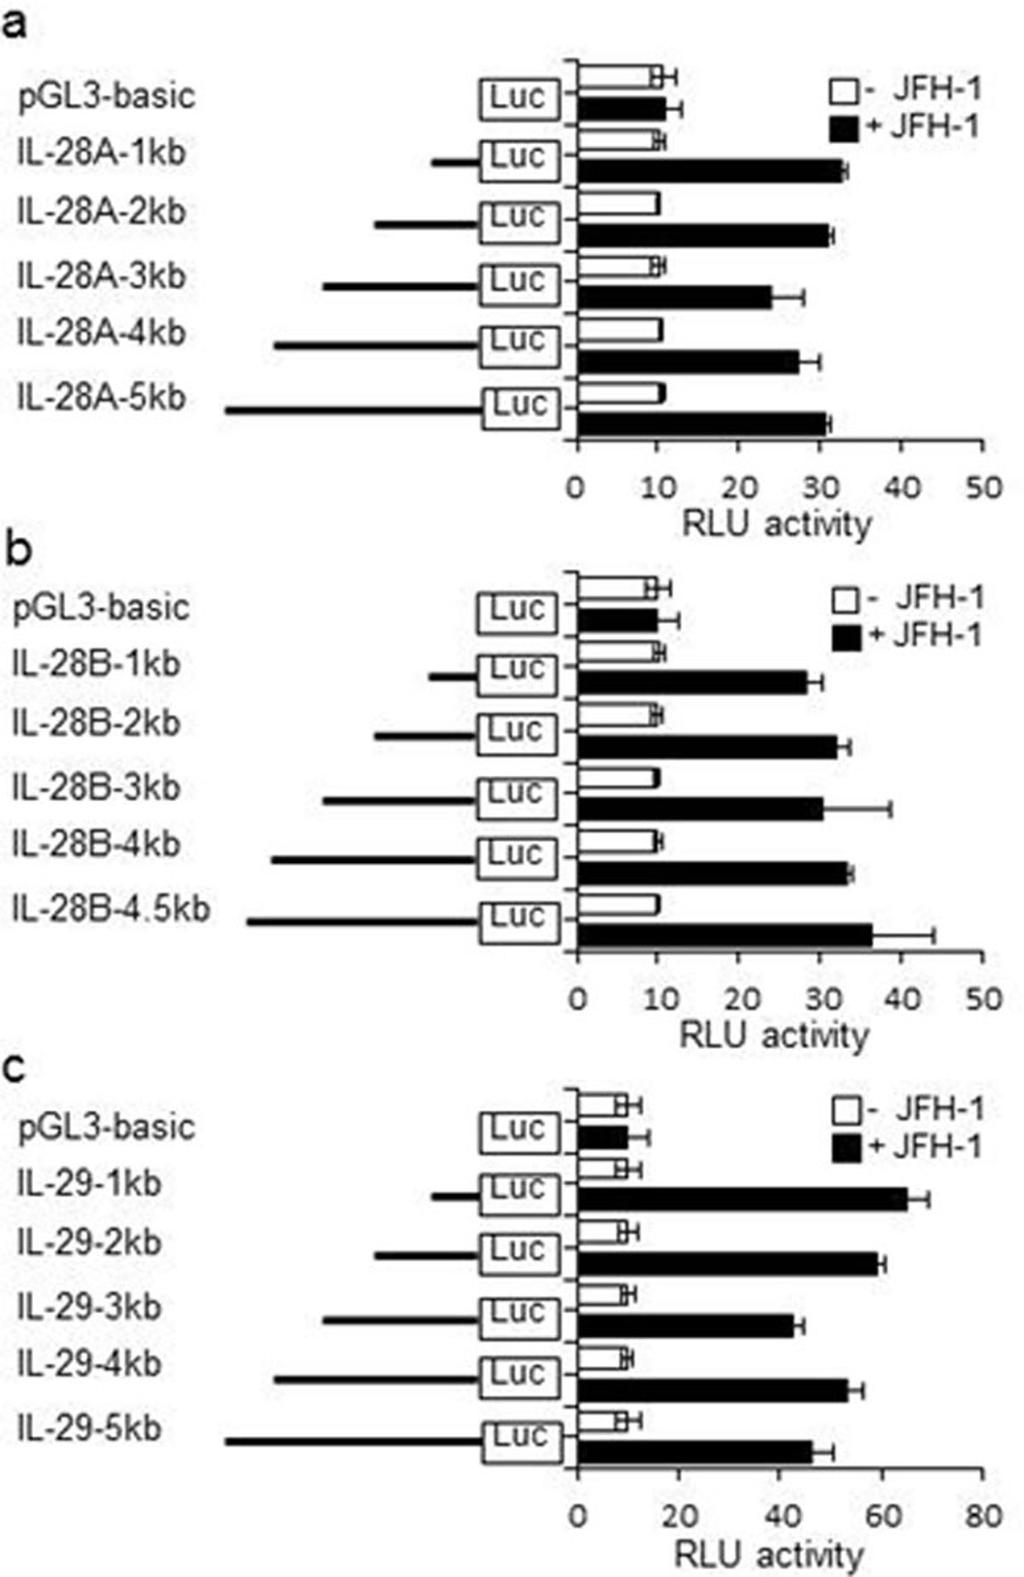 Page 2 of 7 Figure 2 Transcriptional activity at the IL-28A, IL-28B, and IL-29 promoter by HCV infection.